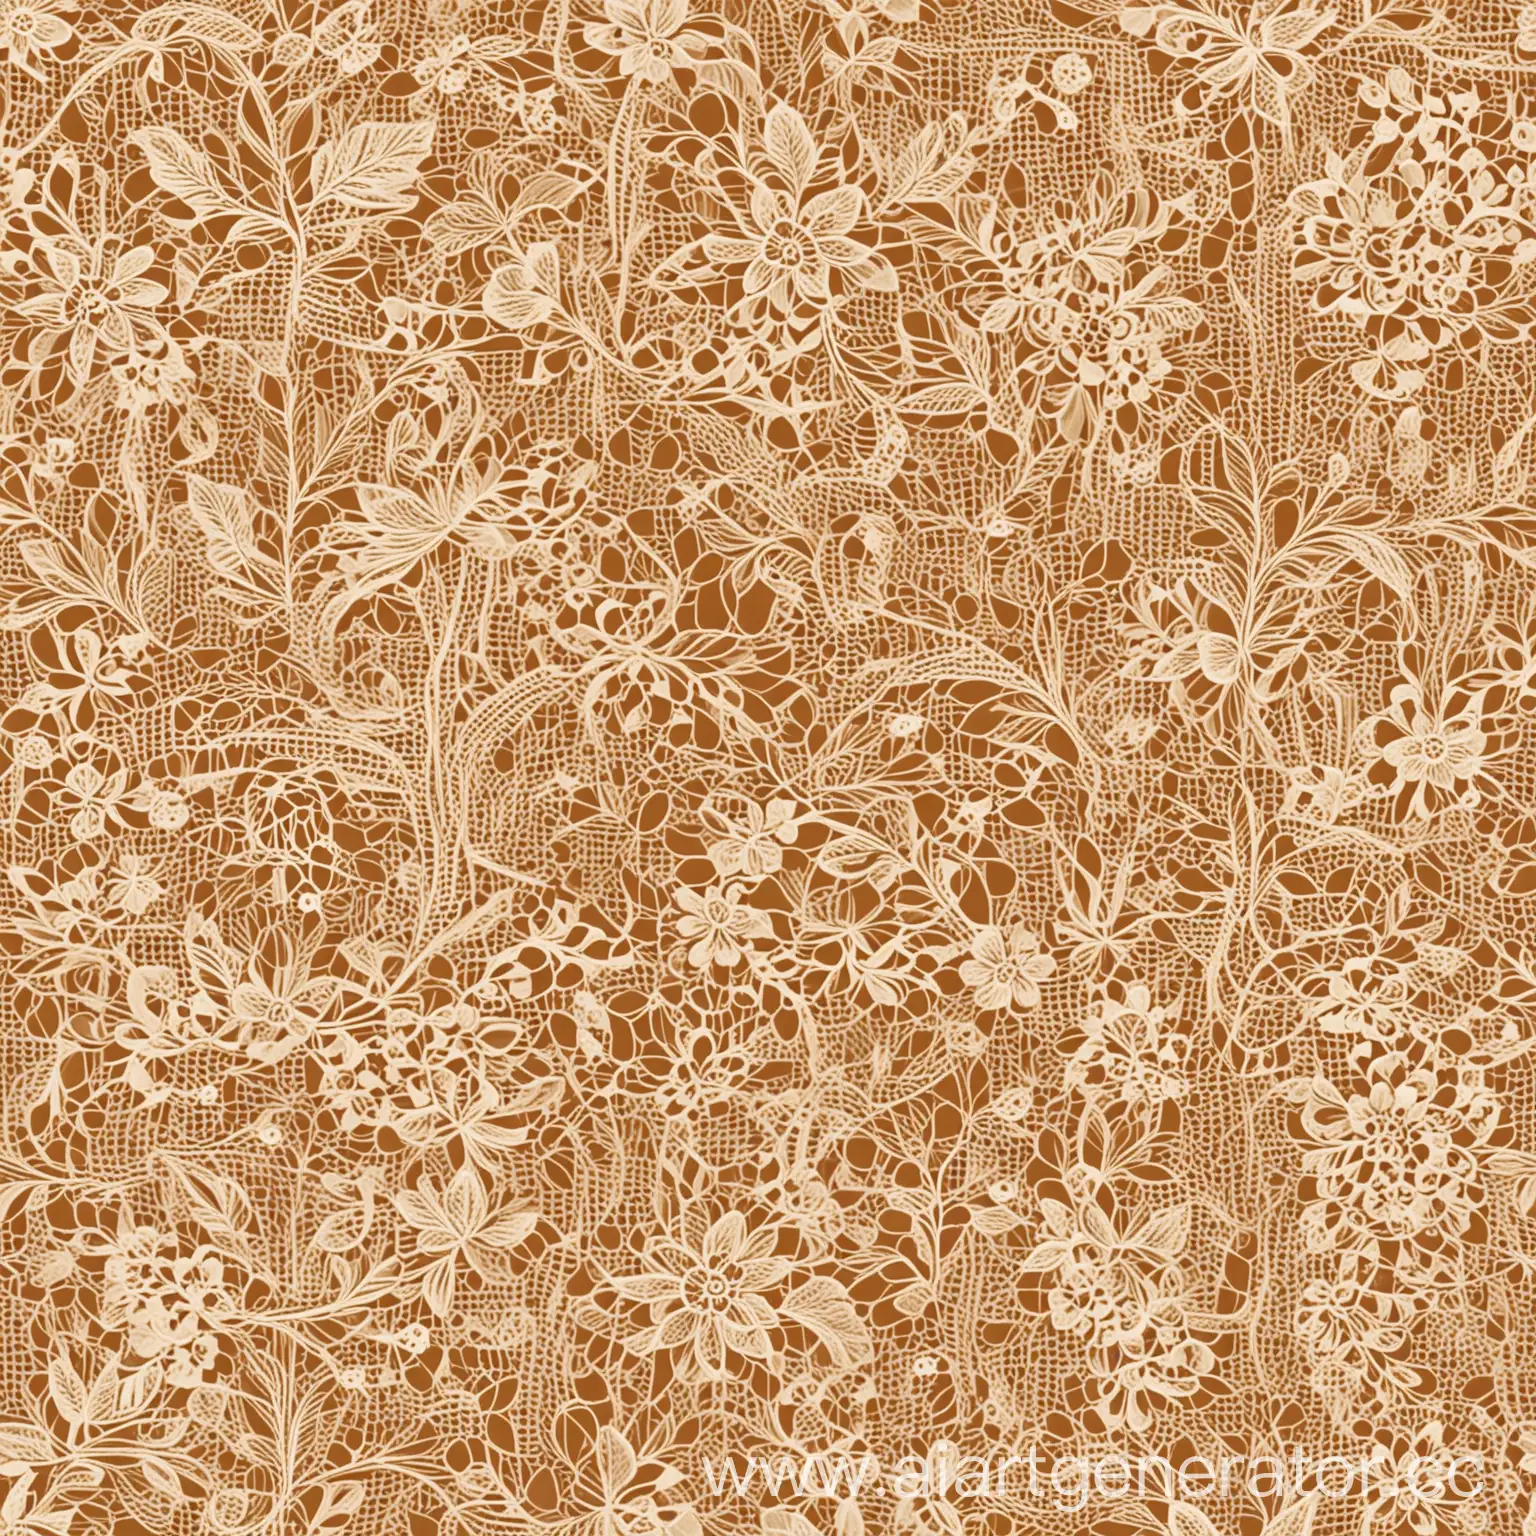 Stylized-Flowers-and-Lace-Pattern-on-Beige-Background